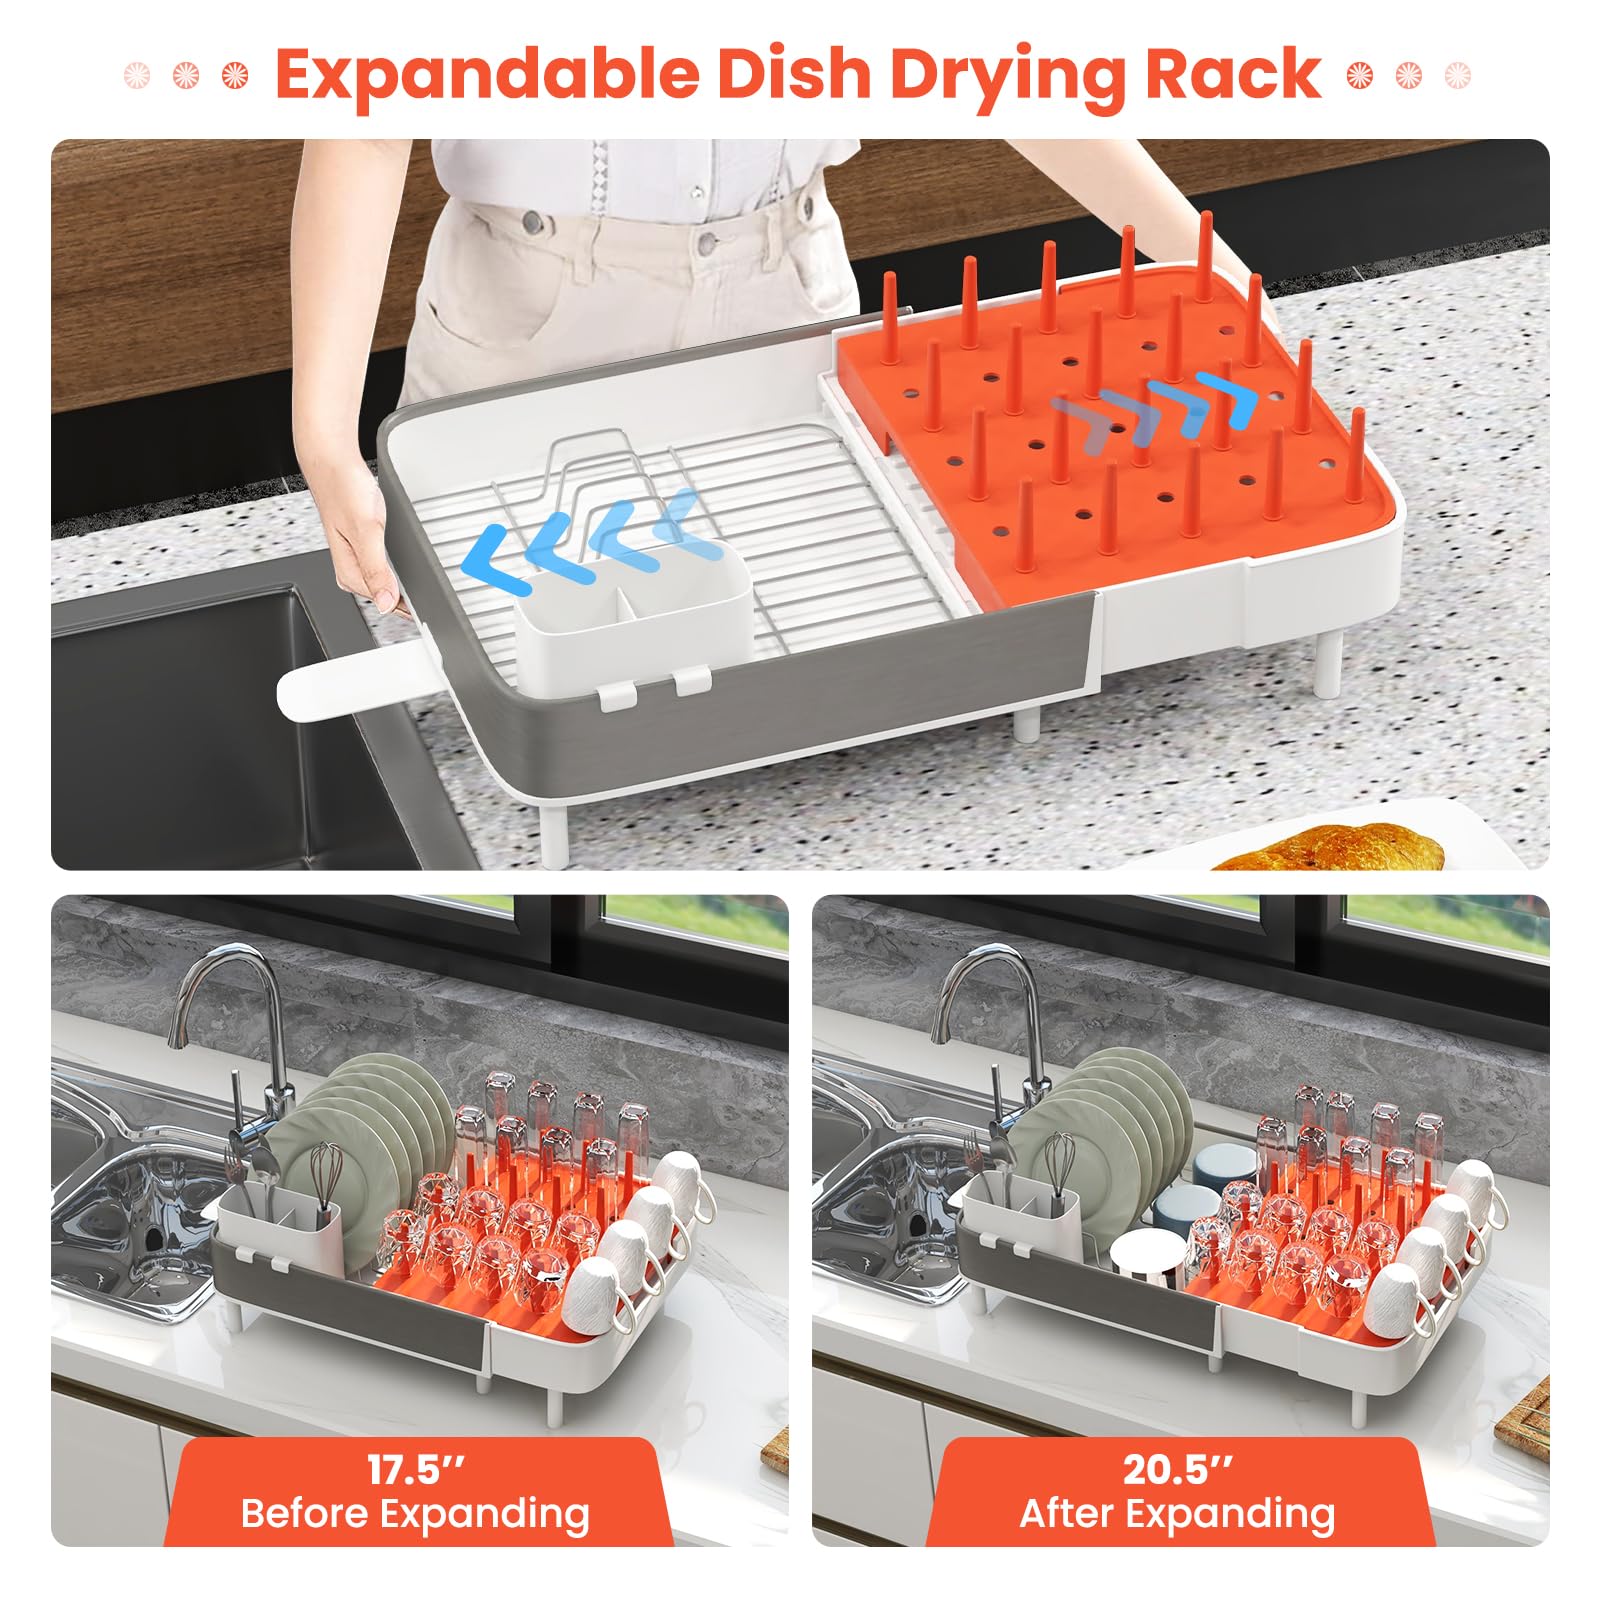 Giantex Expandable Dish Drying Rack - Adjustable Dual-Part Dish Drainer with Detachable Utensil Holder